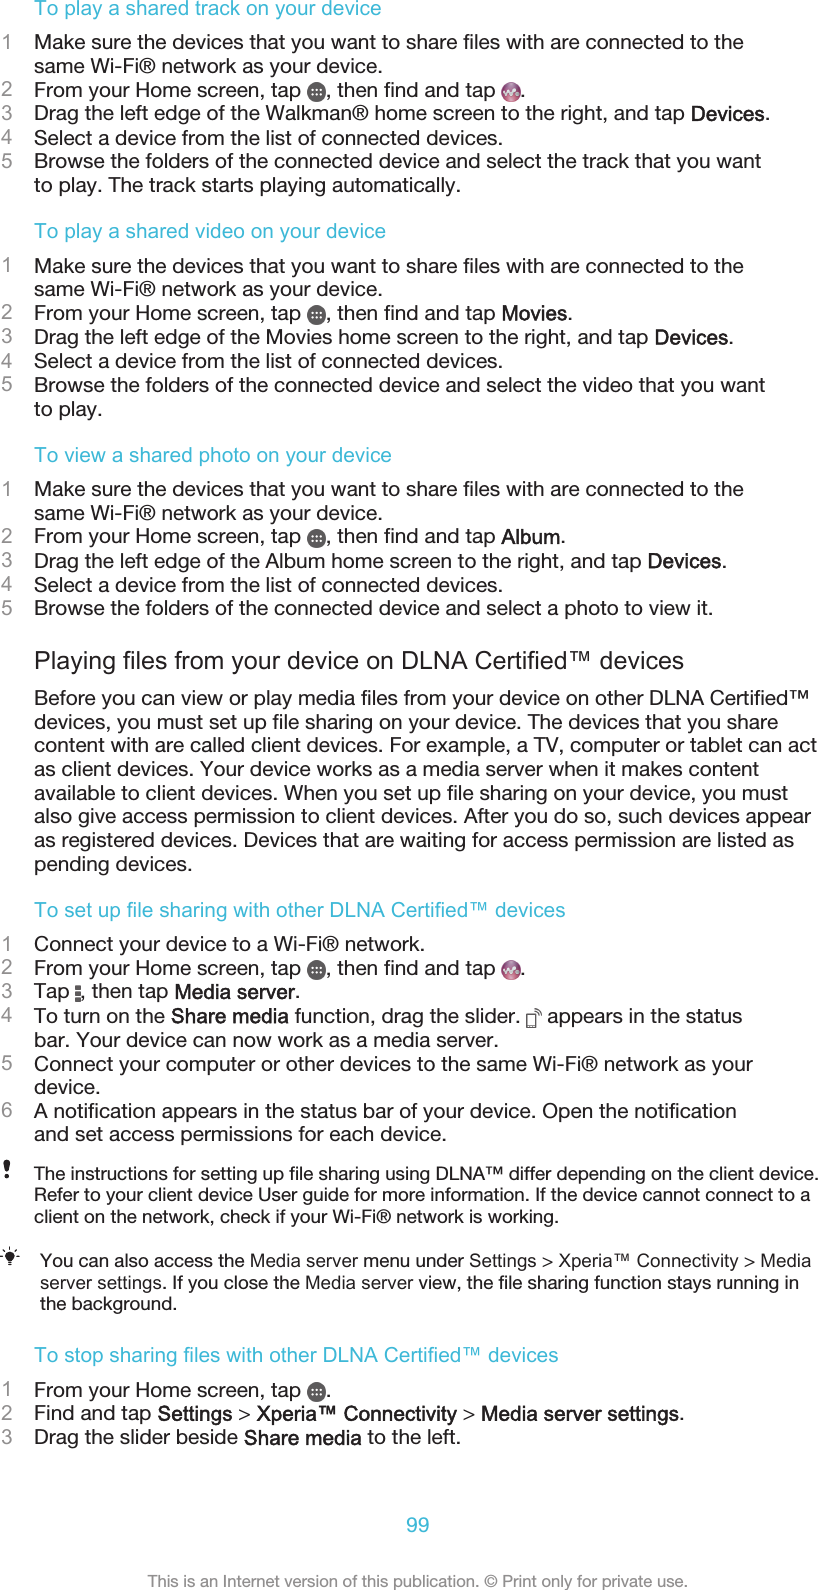 To play a shared track on your device1Make sure the devices that you want to share files with are connected to thesame Wi-Fi® network as your device.2From your Home screen, tap  , then find and tap  .3Drag the left edge of the Walkman® home screen to the right, and tap Devices.4Select a device from the list of connected devices.5Browse the folders of the connected device and select the track that you wantto play. The track starts playing automatically.To play a shared video on your device1Make sure the devices that you want to share files with are connected to thesame Wi-Fi® network as your device.2From your Home screen, tap  , then find and tap Movies.3Drag the left edge of the Movies home screen to the right, and tap Devices.4Select a device from the list of connected devices.5Browse the folders of the connected device and select the video that you wantto play.To view a shared photo on your device1Make sure the devices that you want to share files with are connected to thesame Wi-Fi® network as your device.2From your Home screen, tap  , then find and tap Album.3Drag the left edge of the Album home screen to the right, and tap Devices.4Select a device from the list of connected devices.5Browse the folders of the connected device and select a photo to view it.Playing files from your device on DLNA Certified™ devicesBefore you can view or play media files from your device on other DLNA Certified™devices, you must set up file sharing on your device. The devices that you sharecontent with are called client devices. For example, a TV, computer or tablet can actas client devices. Your device works as a media server when it makes contentavailable to client devices. When you set up file sharing on your device, you mustalso give access permission to client devices. After you do so, such devices appearas registered devices. Devices that are waiting for access permission are listed aspending devices.To set up file sharing with other DLNA Certified™ devices1Connect your device to a Wi-Fi® network.2From your Home screen, tap  , then find and tap  .3Tap  , then tap Media server.4To turn on the Share media function, drag the slider.   appears in the statusbar. Your device can now work as a media server.5Connect your computer or other devices to the same Wi-Fi® network as yourdevice.6A notification appears in the status bar of your device. Open the notificationand set access permissions for each device.The instructions for setting up file sharing using DLNA™ differ depending on the client device.Refer to your client device User guide for more information. If the device cannot connect to aclient on the network, check if your Wi-Fi® network is working.You can also access the Media server menu under Settings &gt; Xperia™ Connectivity &gt; Mediaserver settings. If you close the Media server view, the file sharing function stays running inthe background.To stop sharing files with other DLNA Certified™ devices1From your Home screen, tap  .2Find and tap Settings &gt; Xperia™ Connectivity &gt; Media server settings.3Drag the slider beside Share media to the left.99This is an Internet version of this publication. © Print only for private use.